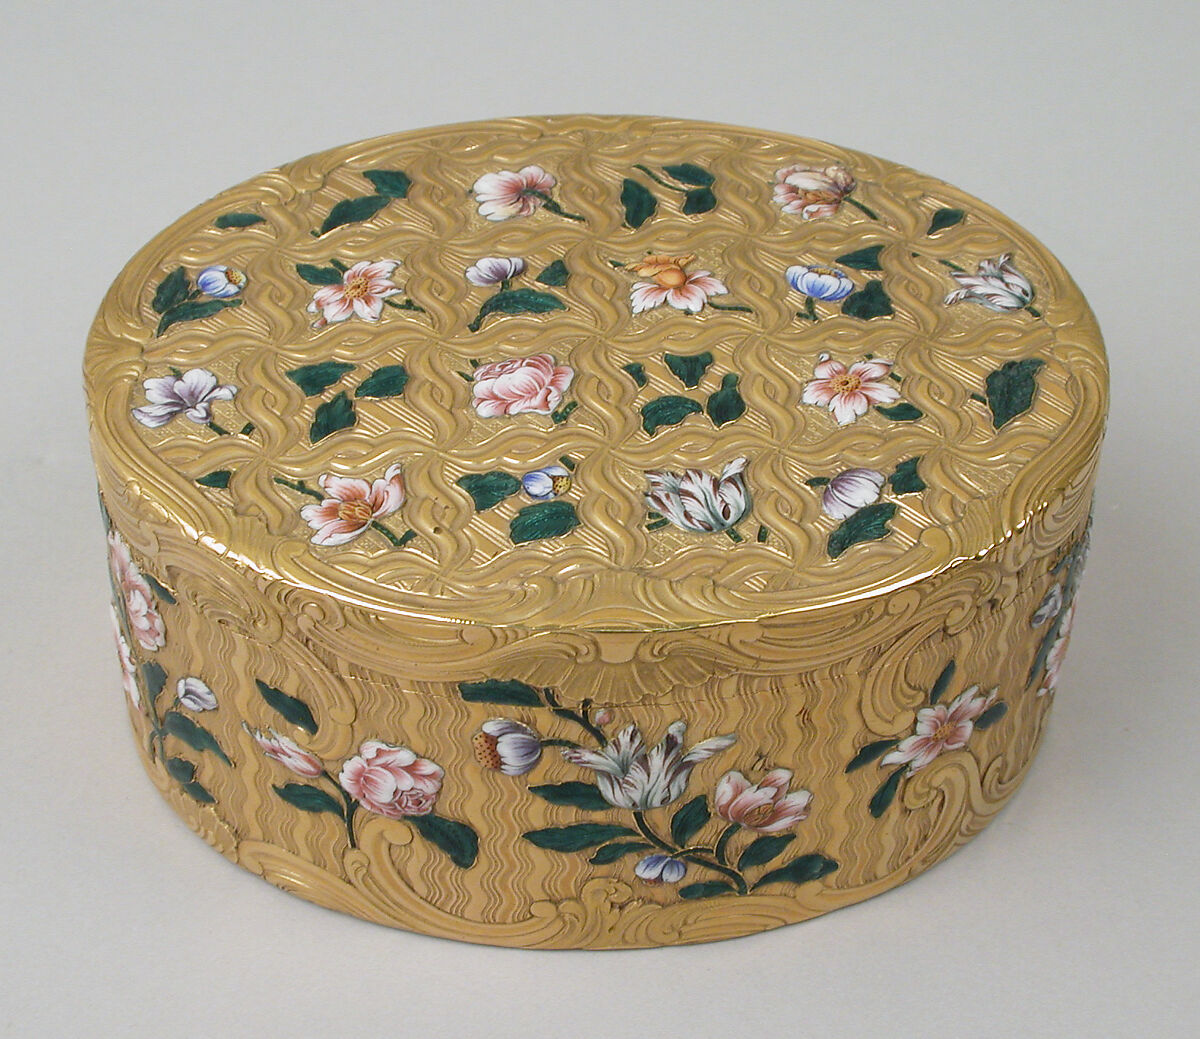 Snuffbox, Jean Frémin (French, active 1738–83, died 1786), Gold, enamel, French, Paris 